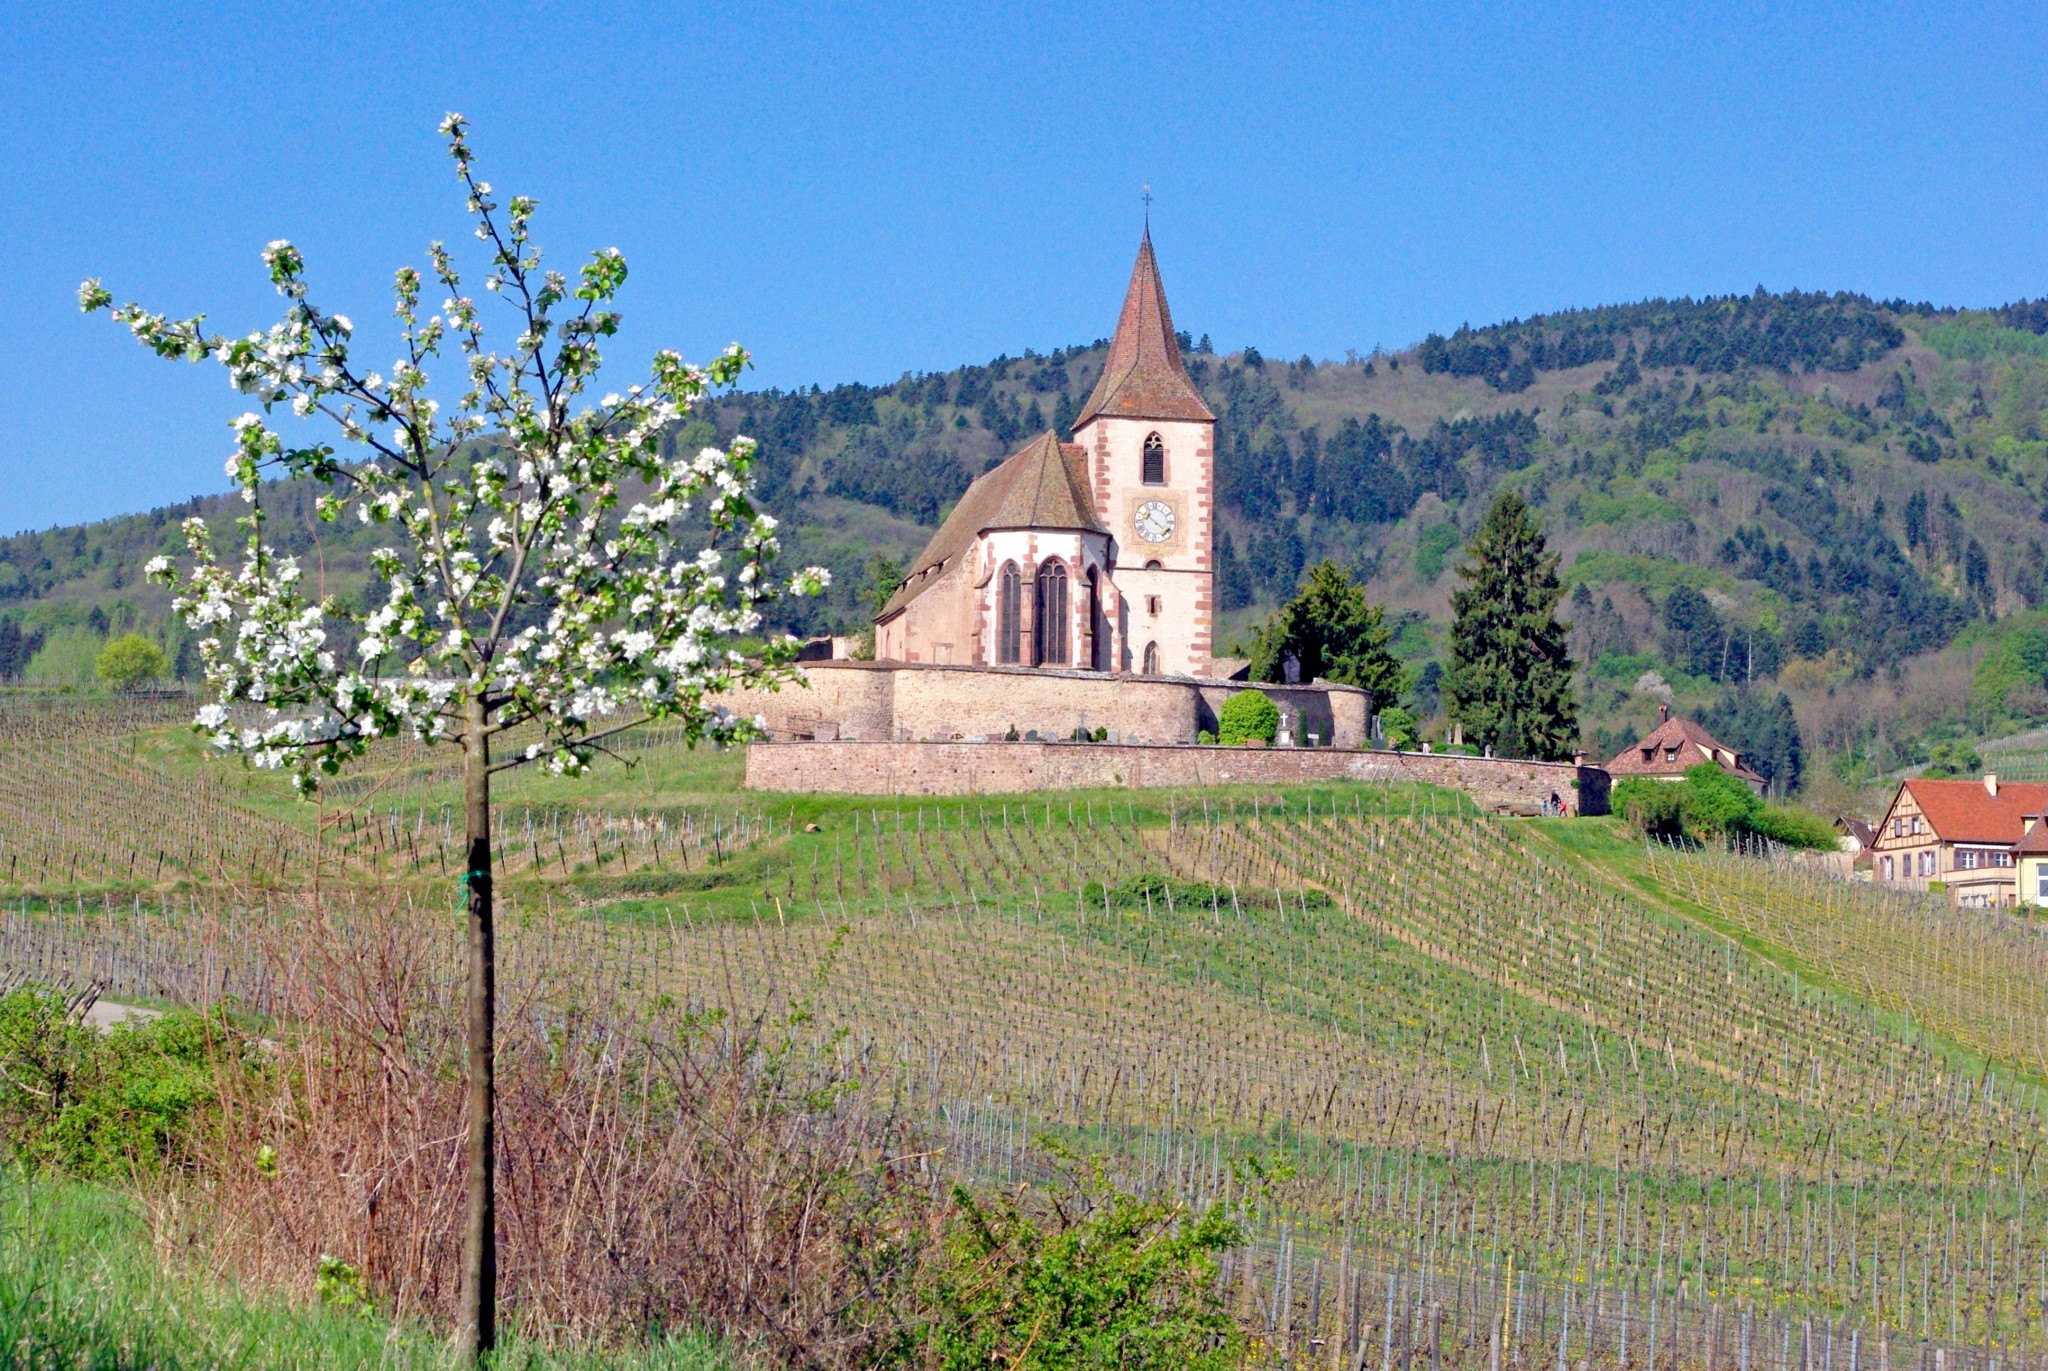 The fortified church of Hunawihr above the vineyards © French Moments